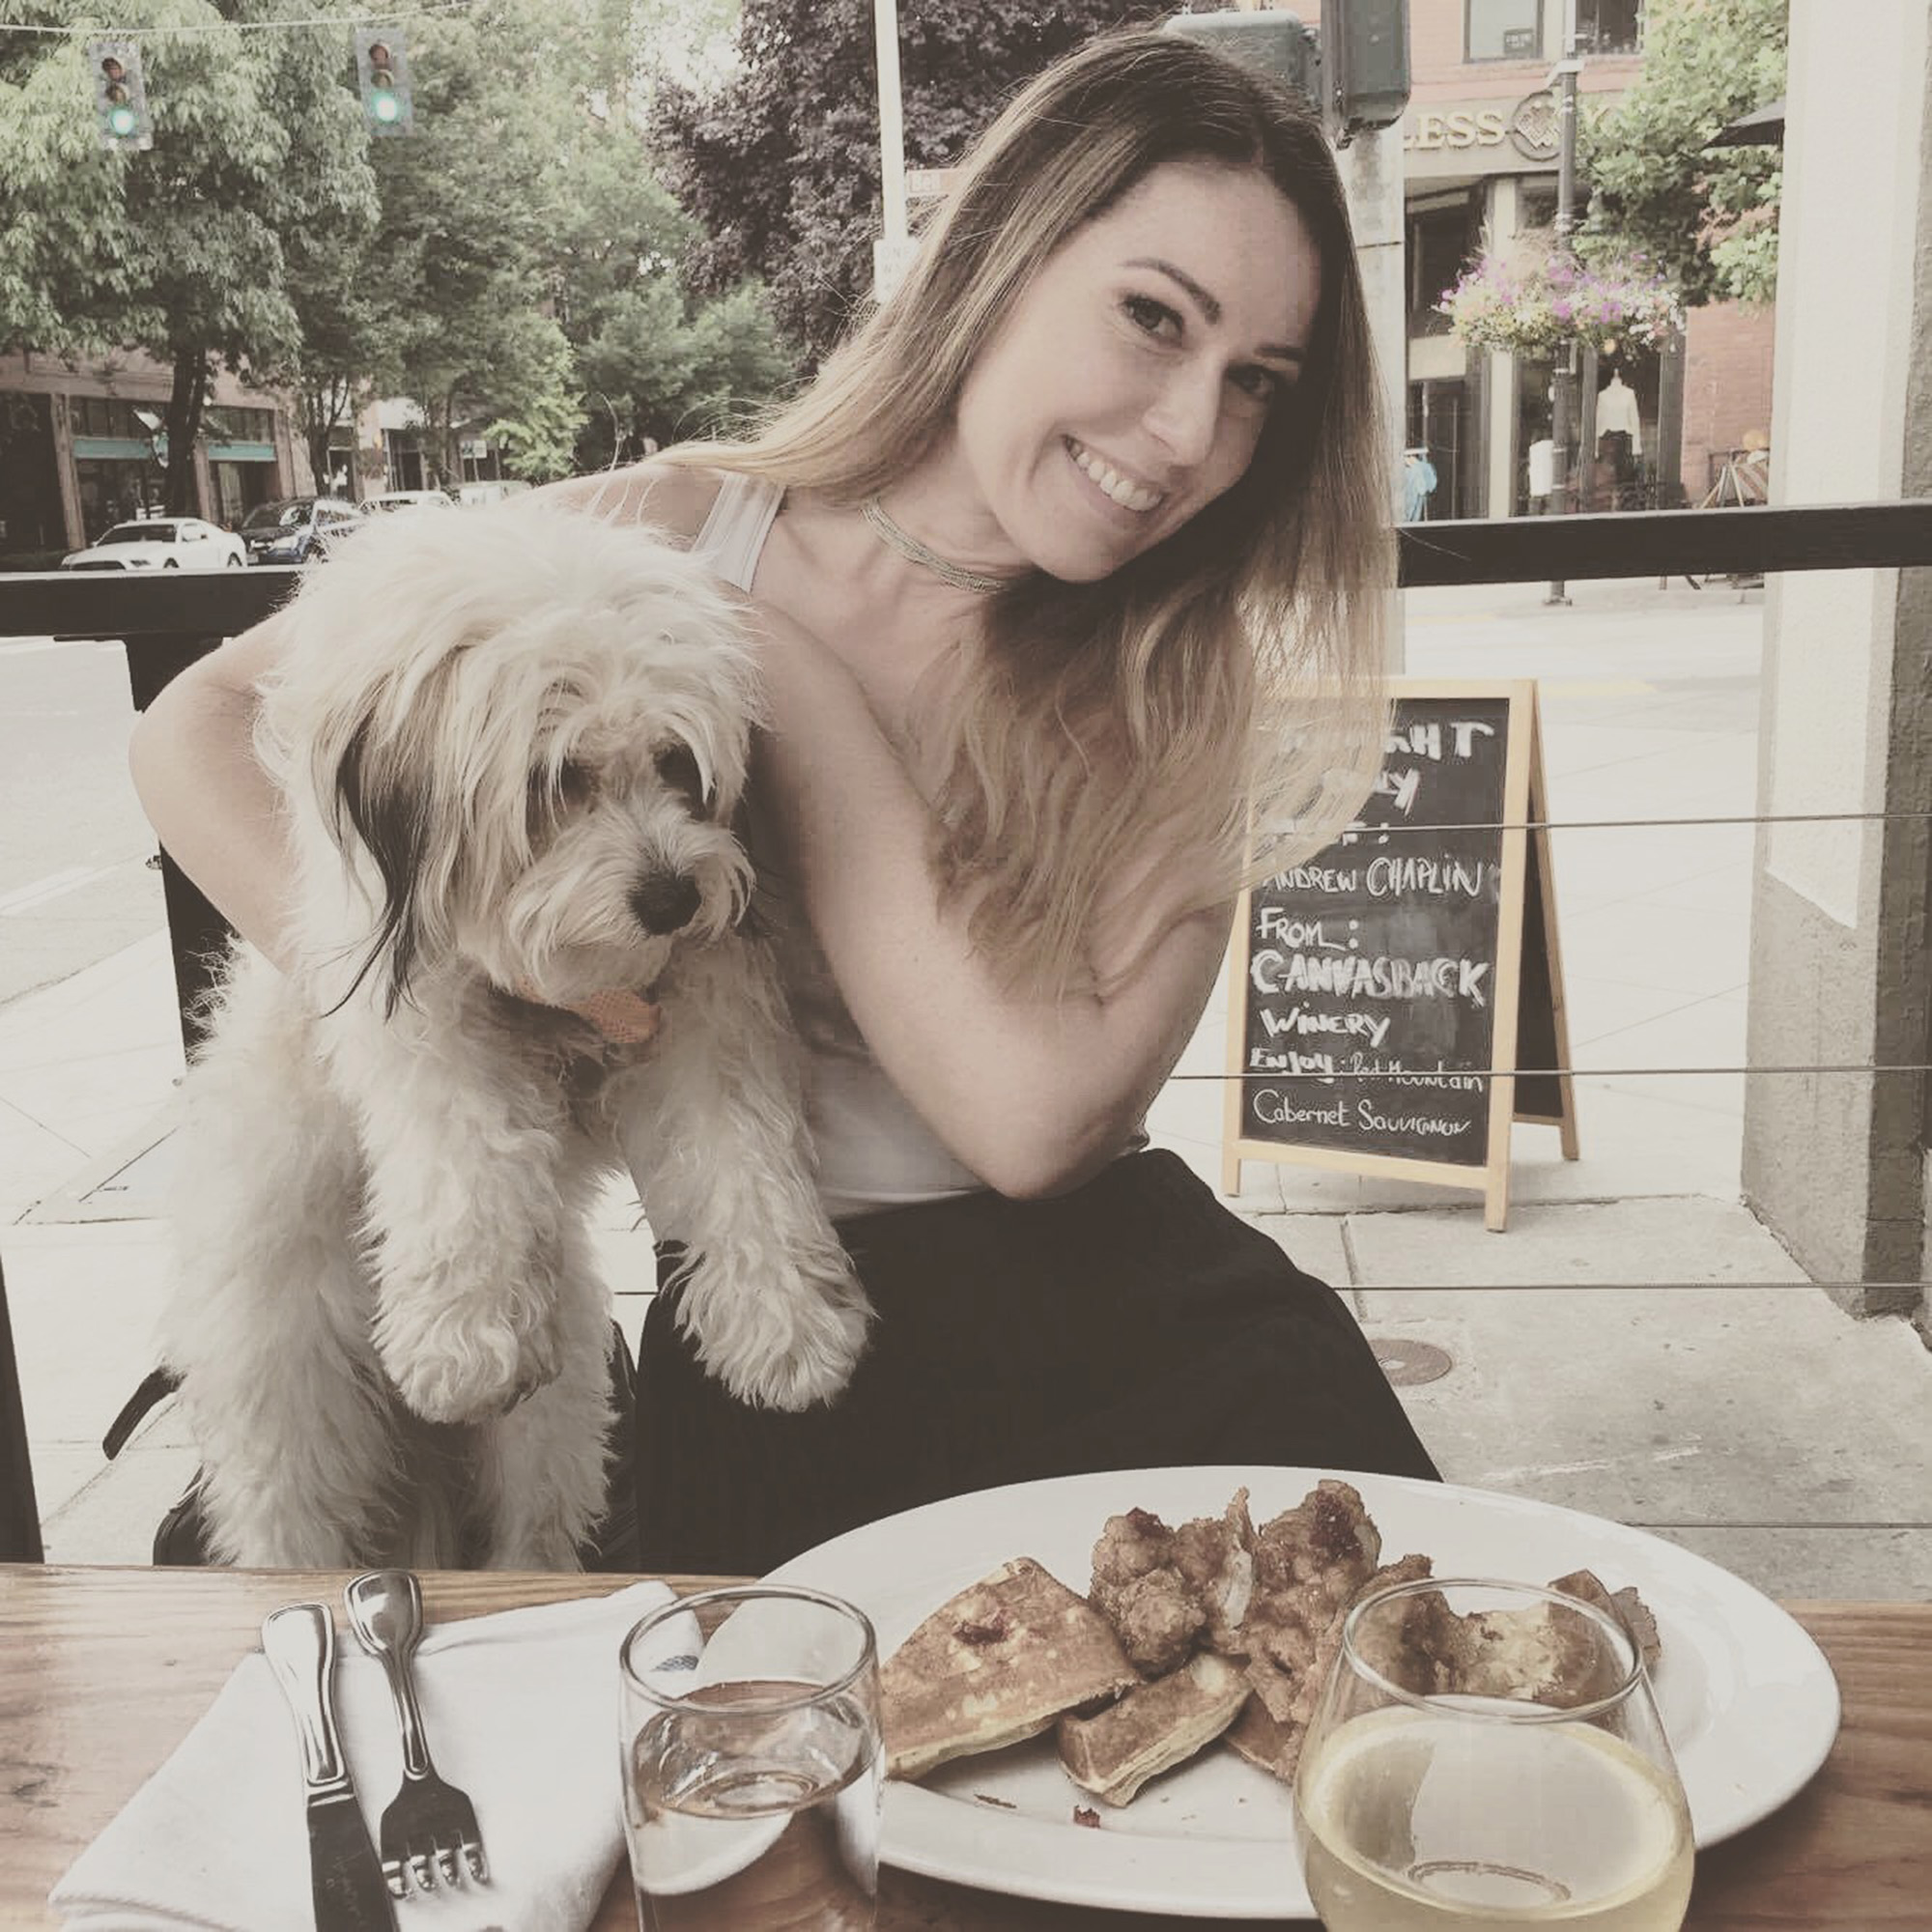 Marie and her dog having brunch at a Seattle restaurant